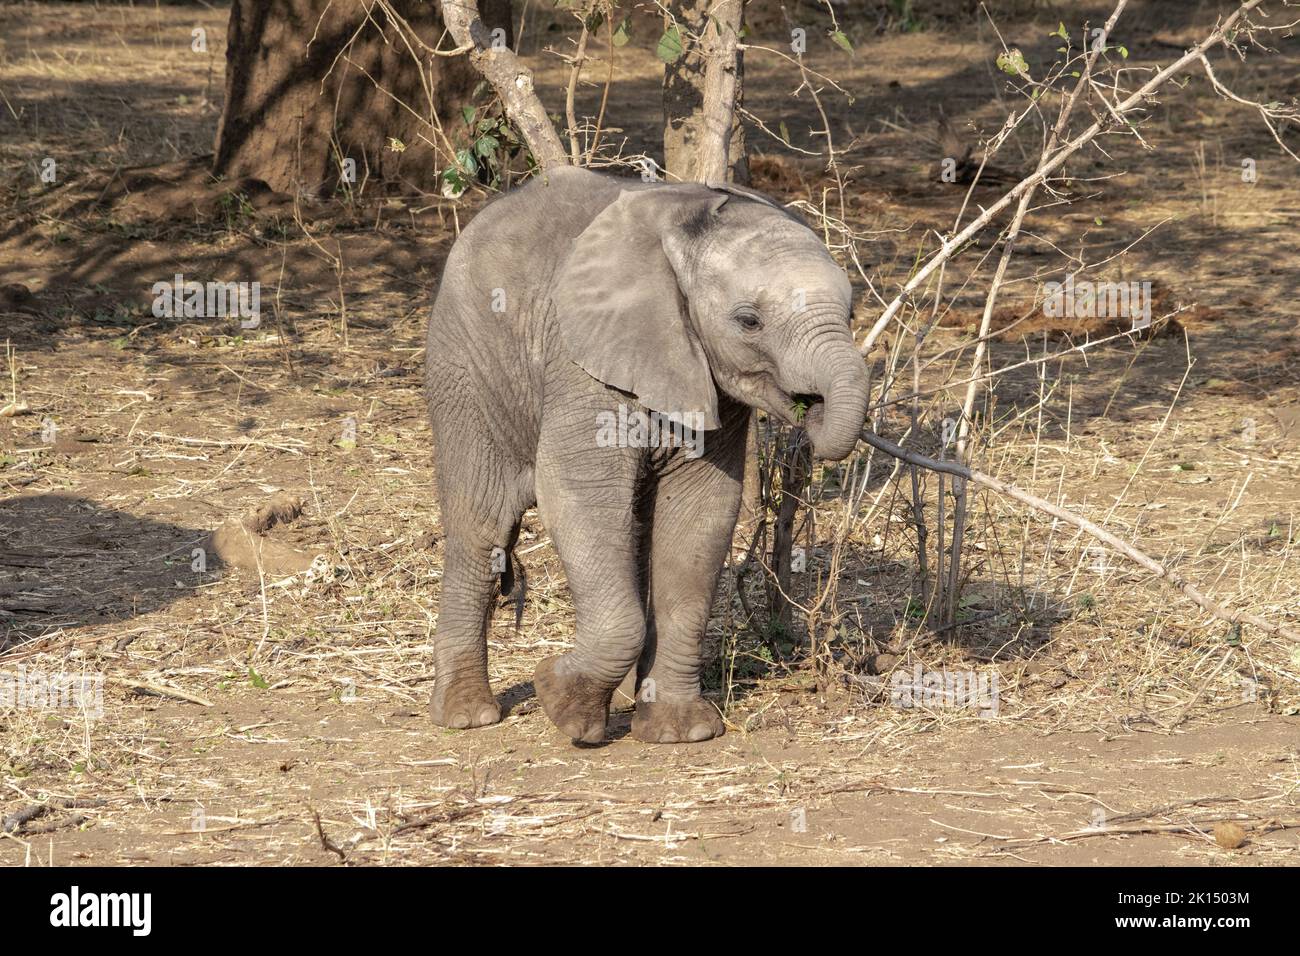 An amazing close up of an elephant cub on the sandy banks of an African river Stock Photo